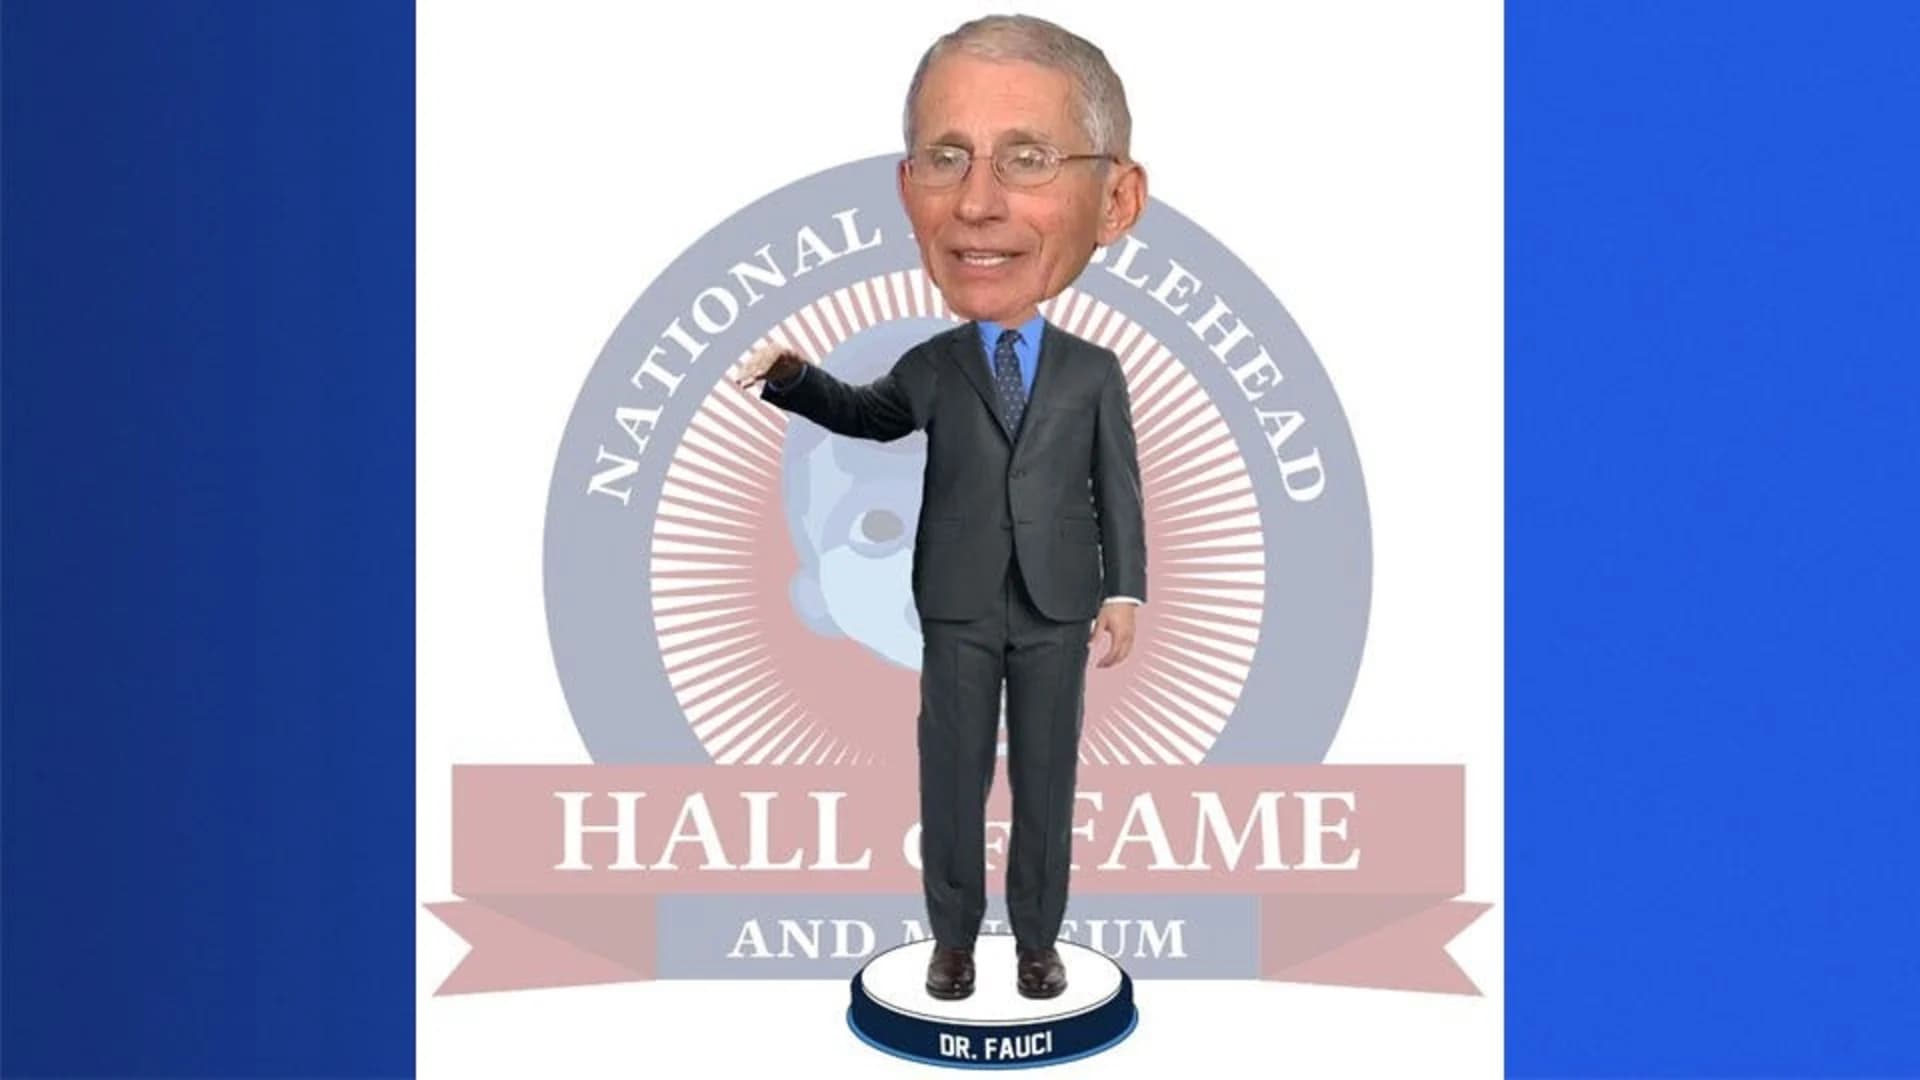 Proceeds from Dr. Fauci bobblehead sales to benefit American Hospital Association